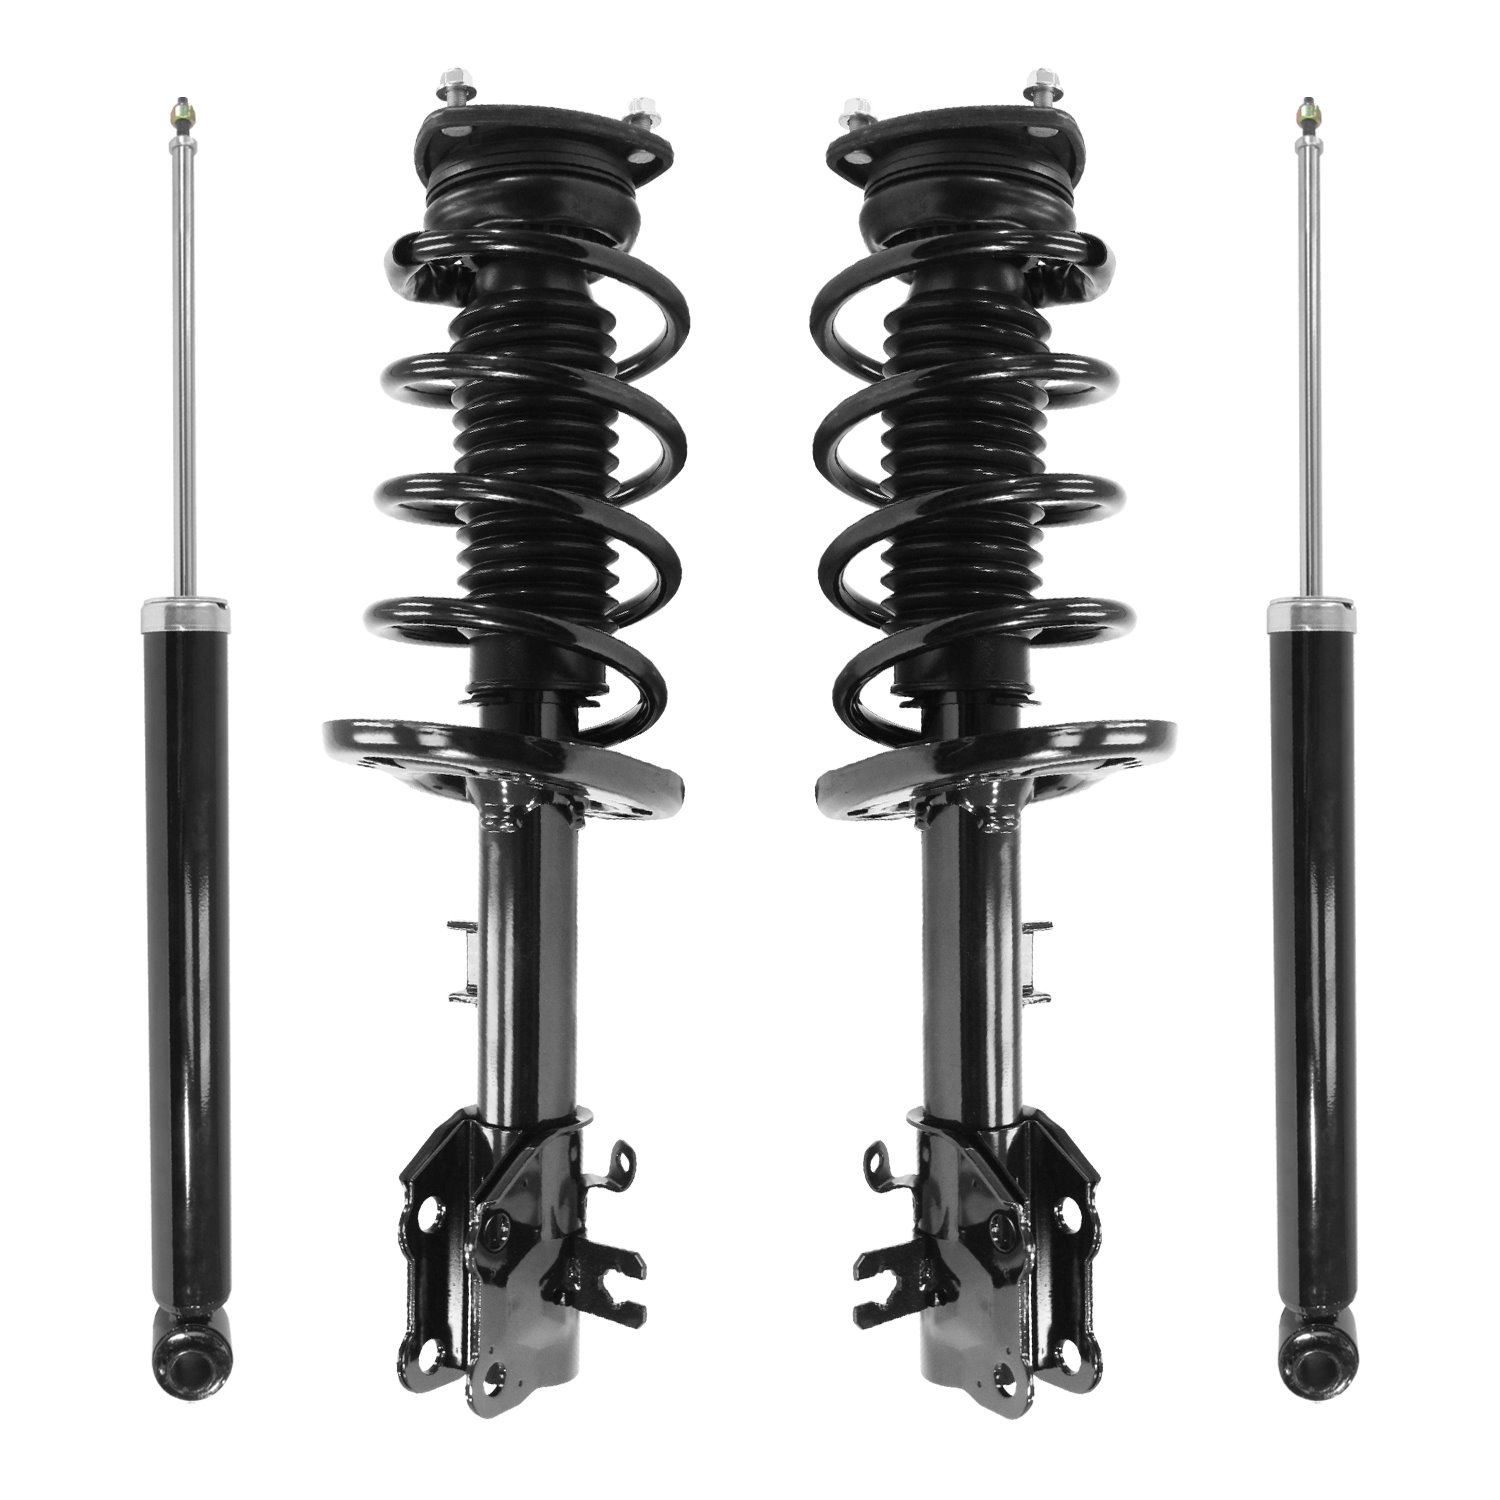 4-11697-259190-001 Front & Rear Suspension Strut & Coil Spring Assembly Fits Select Mazda CX-5